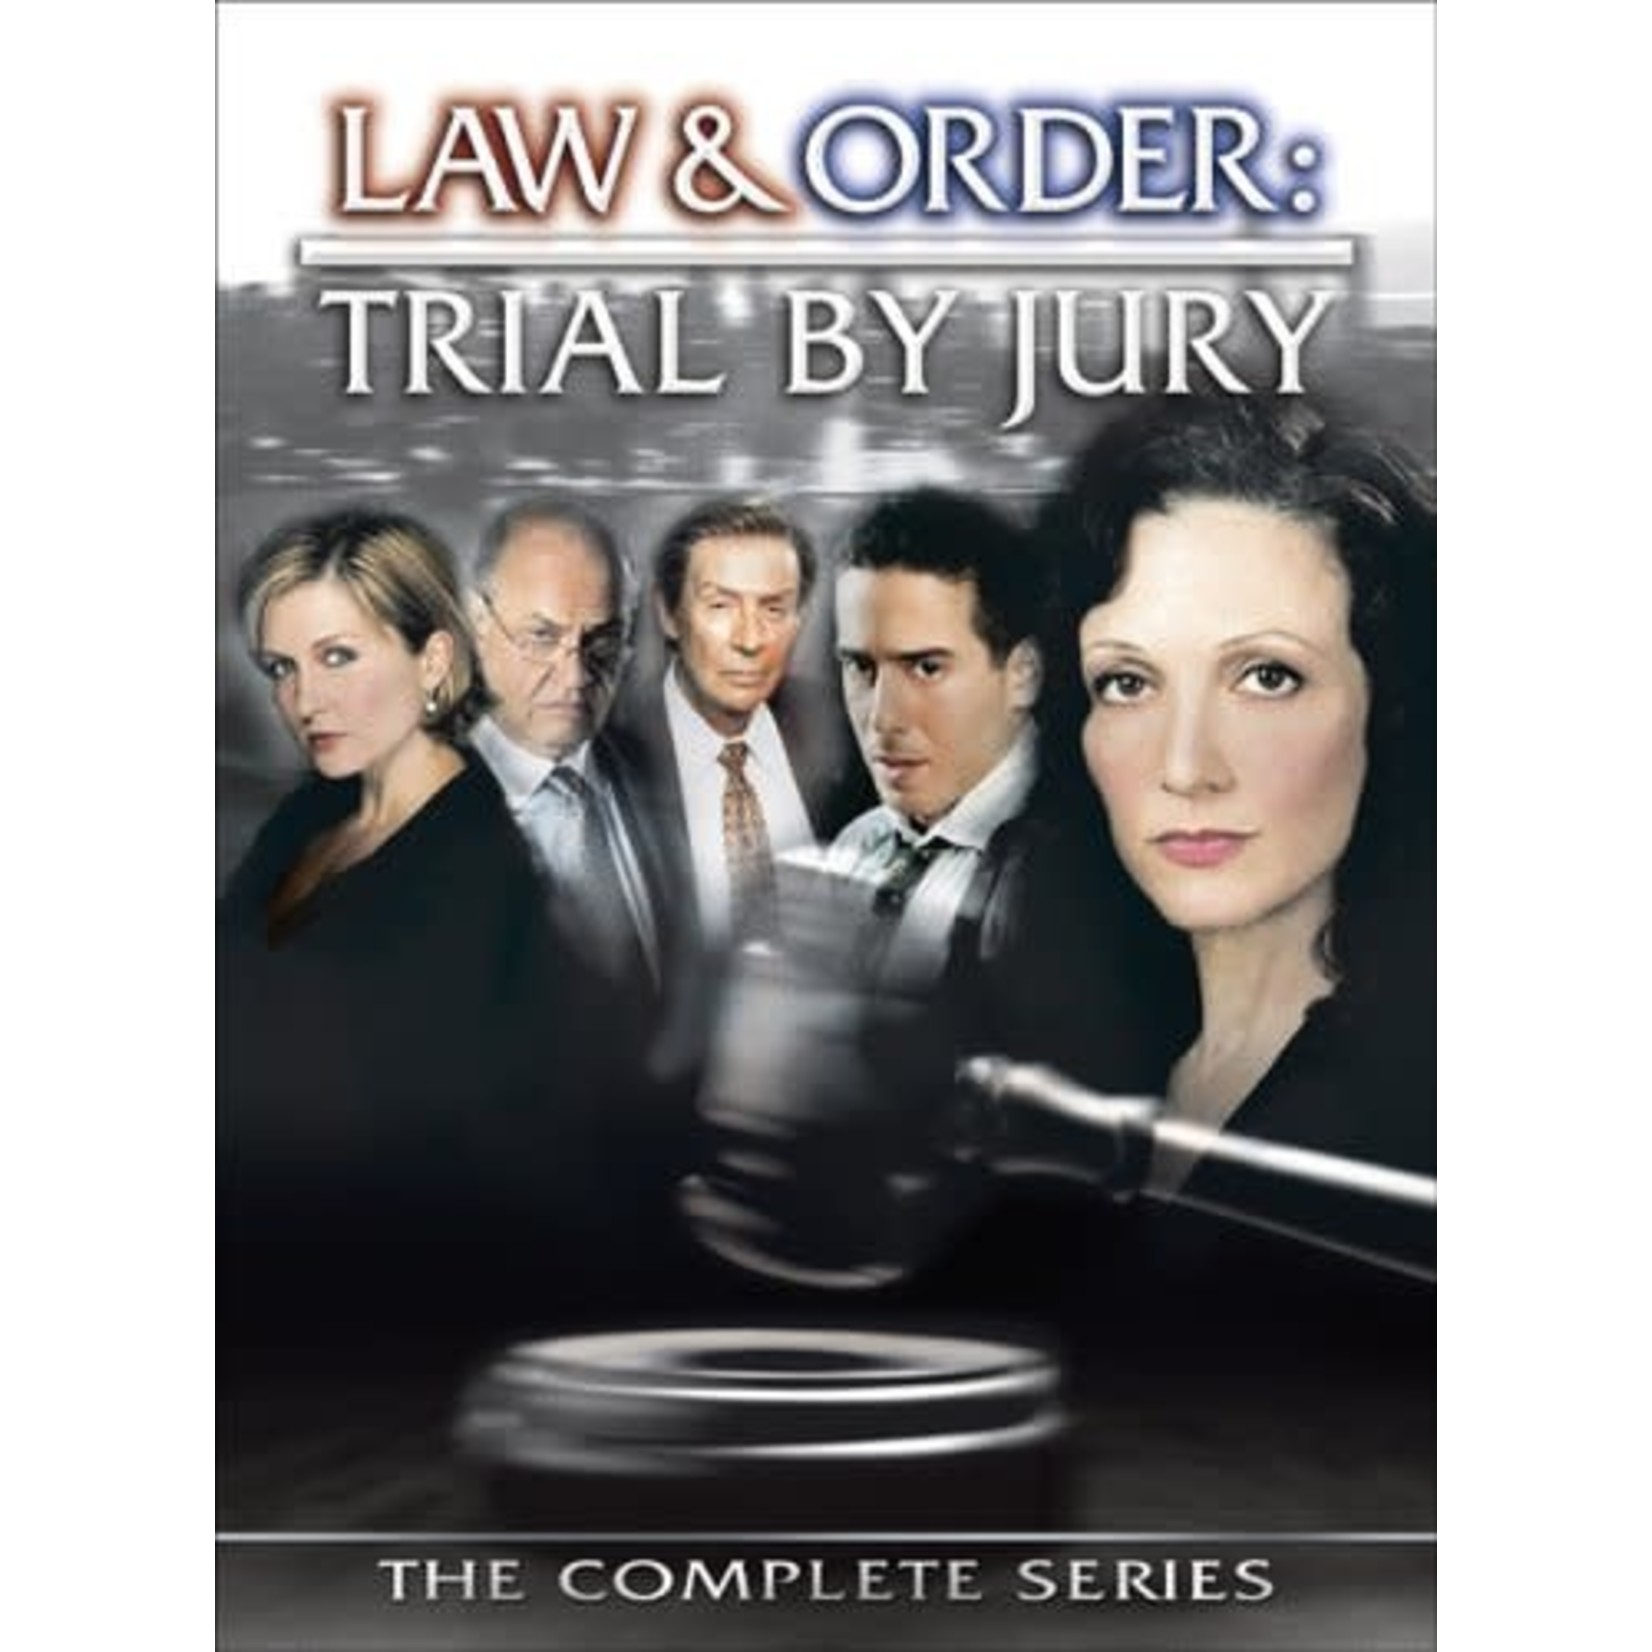 Law & Order: Trial By Jury - The Complete Series [USED DVD]